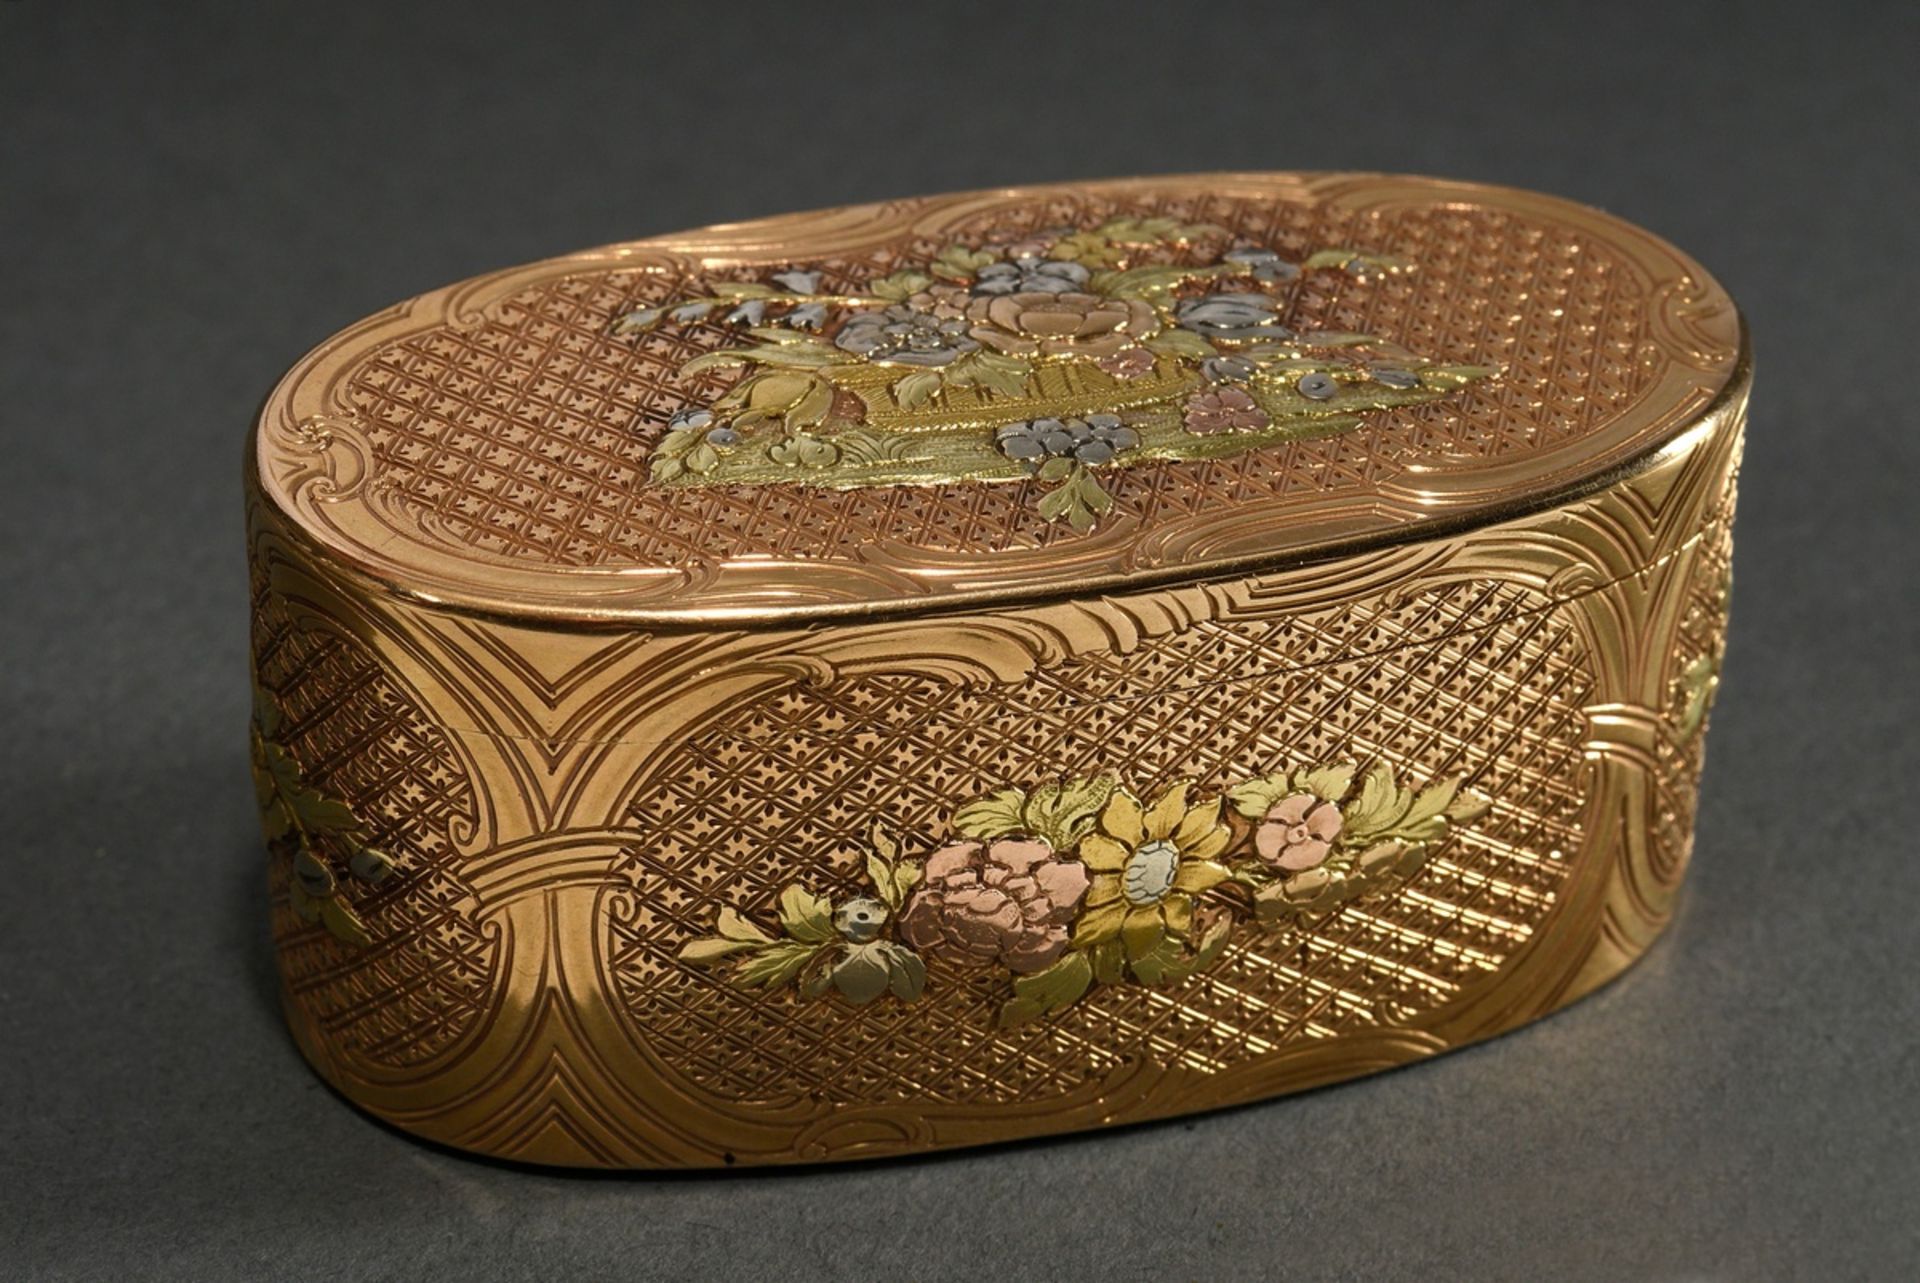 A very fine oval snuff box in tricolour gold, all sides geometrically chased with rocaille cartouch